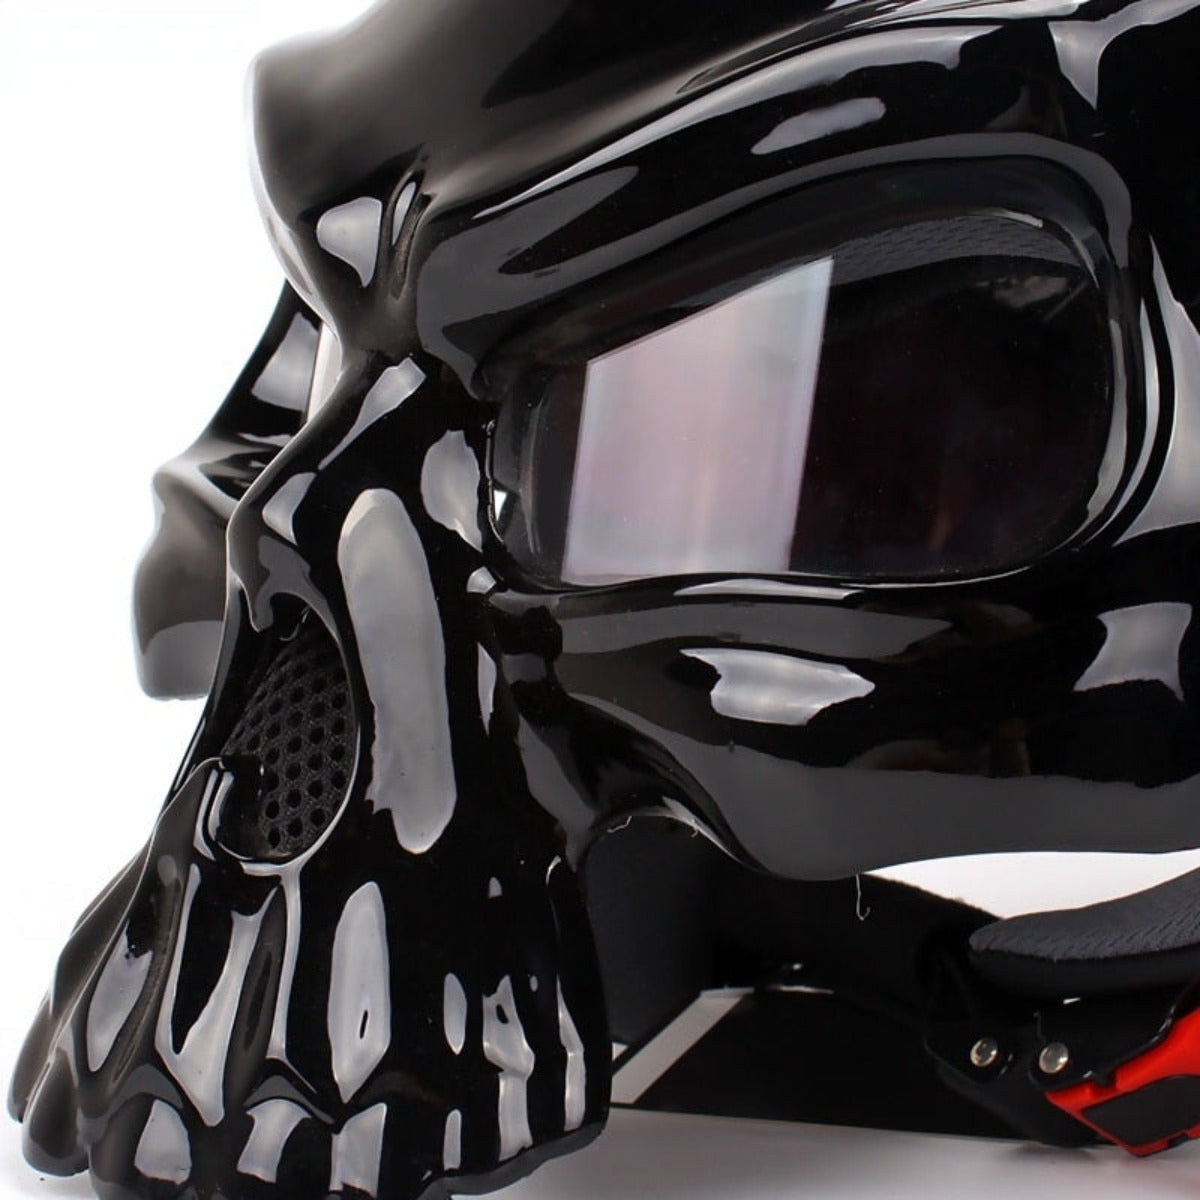 A durable image of a Motorcycle Half Face Skull Helmet on a white background.